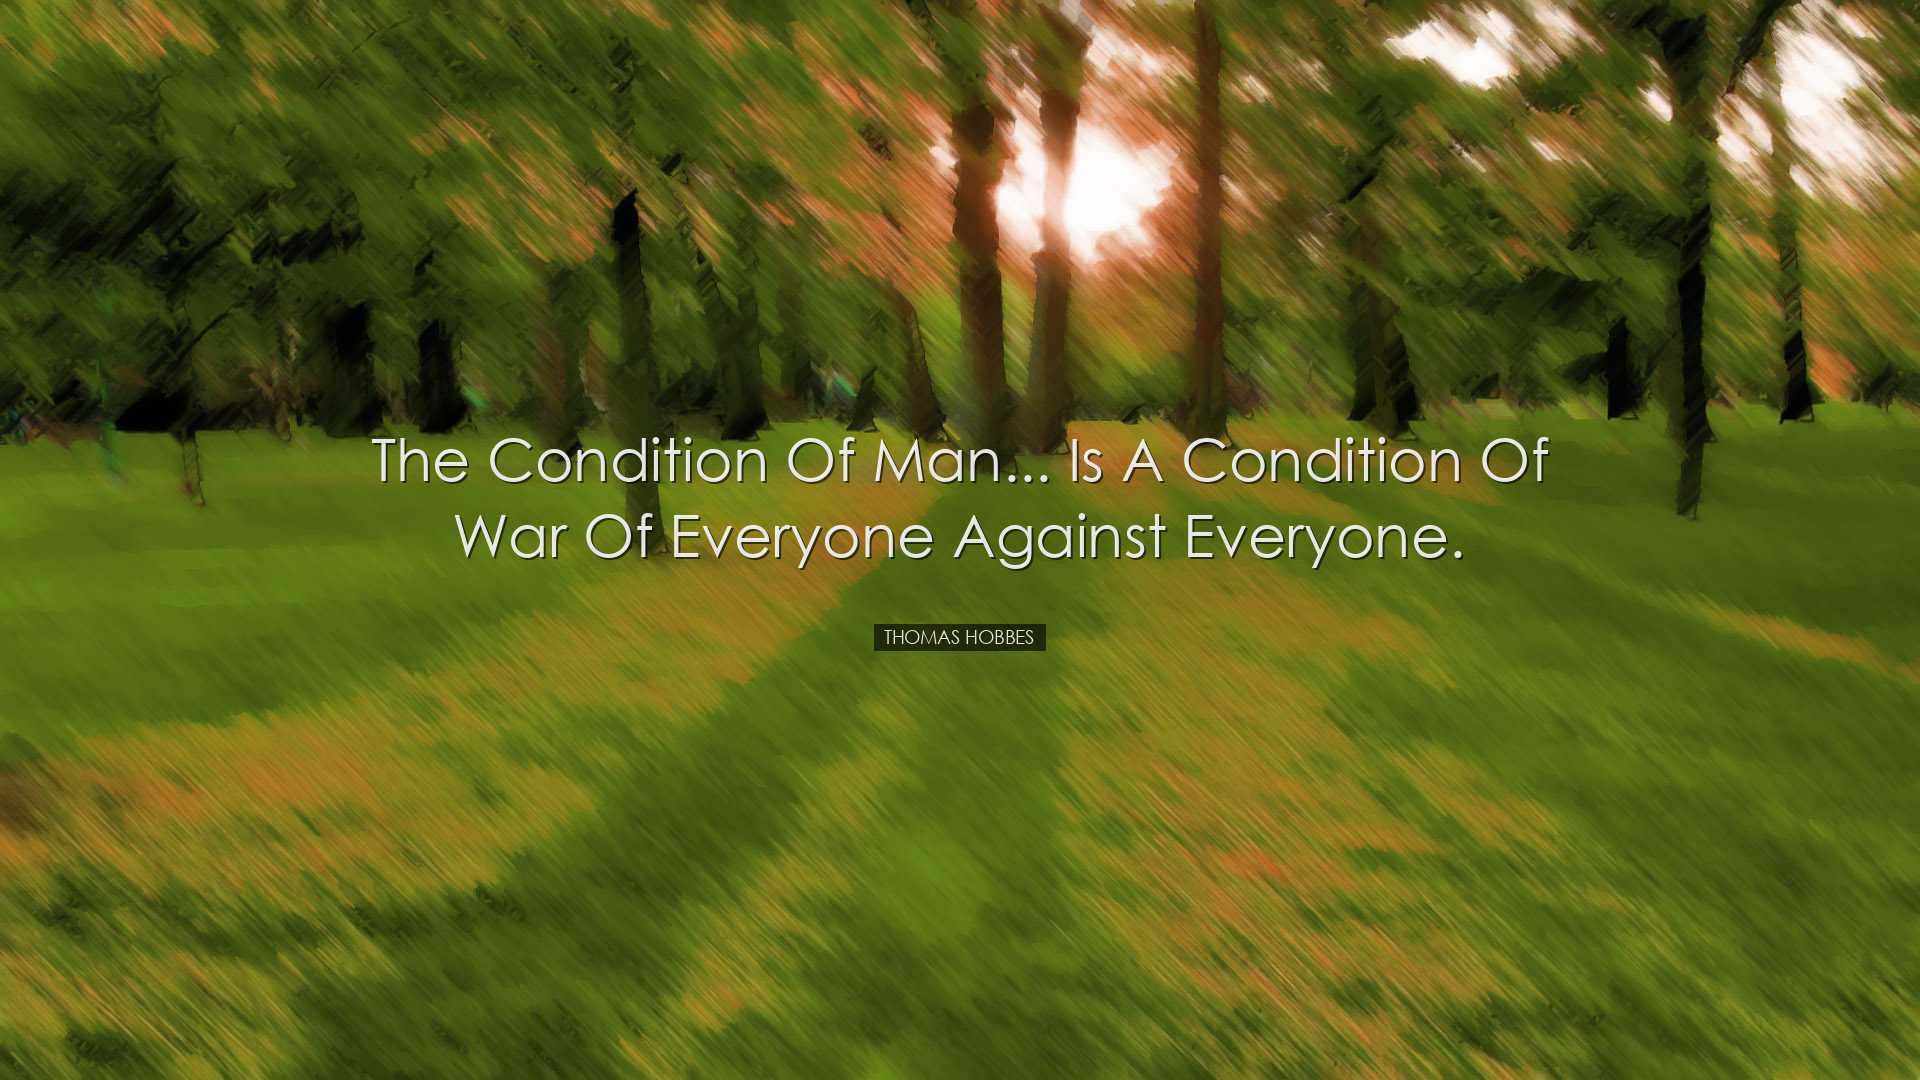 The condition of man... is a condition of war of everyone against